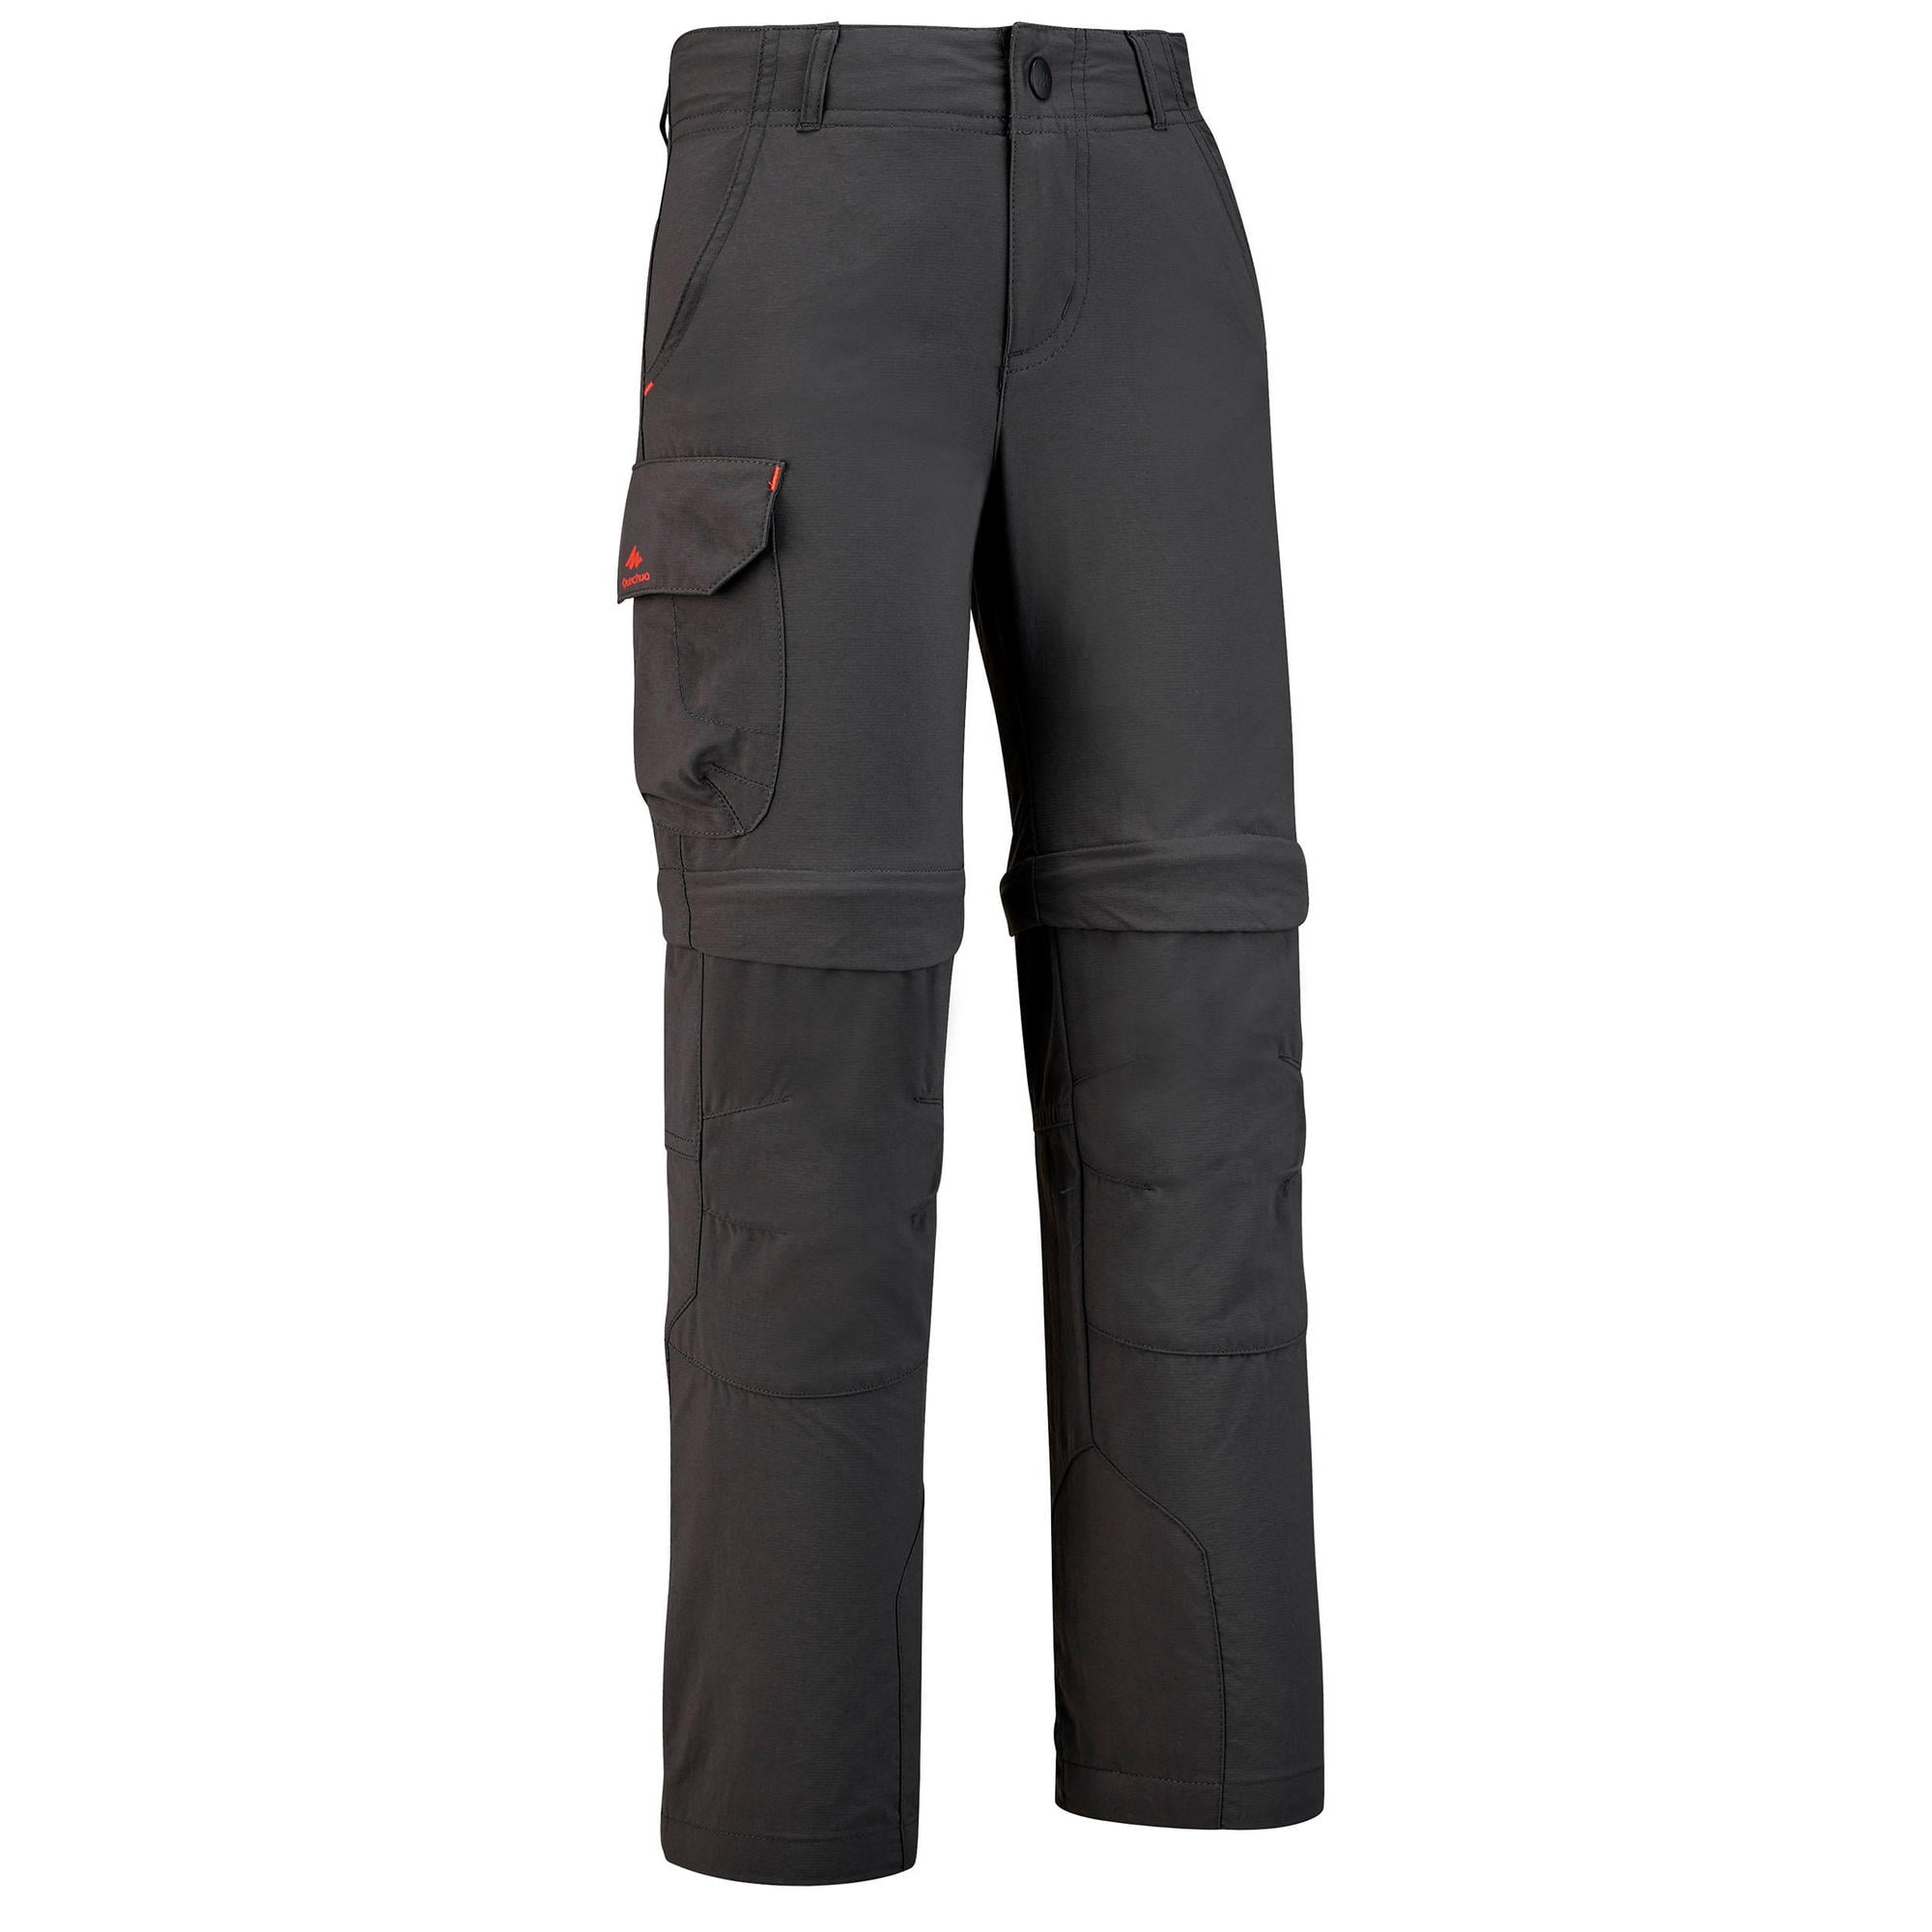 QUECHUA Arpenaz 500 Men's Hiking Trousers By Decathlon - Buy QUECHUA  Arpenaz 500 Men's Hiking Trousers By Decathlon Online at Best Prices in  India on Snapdeal